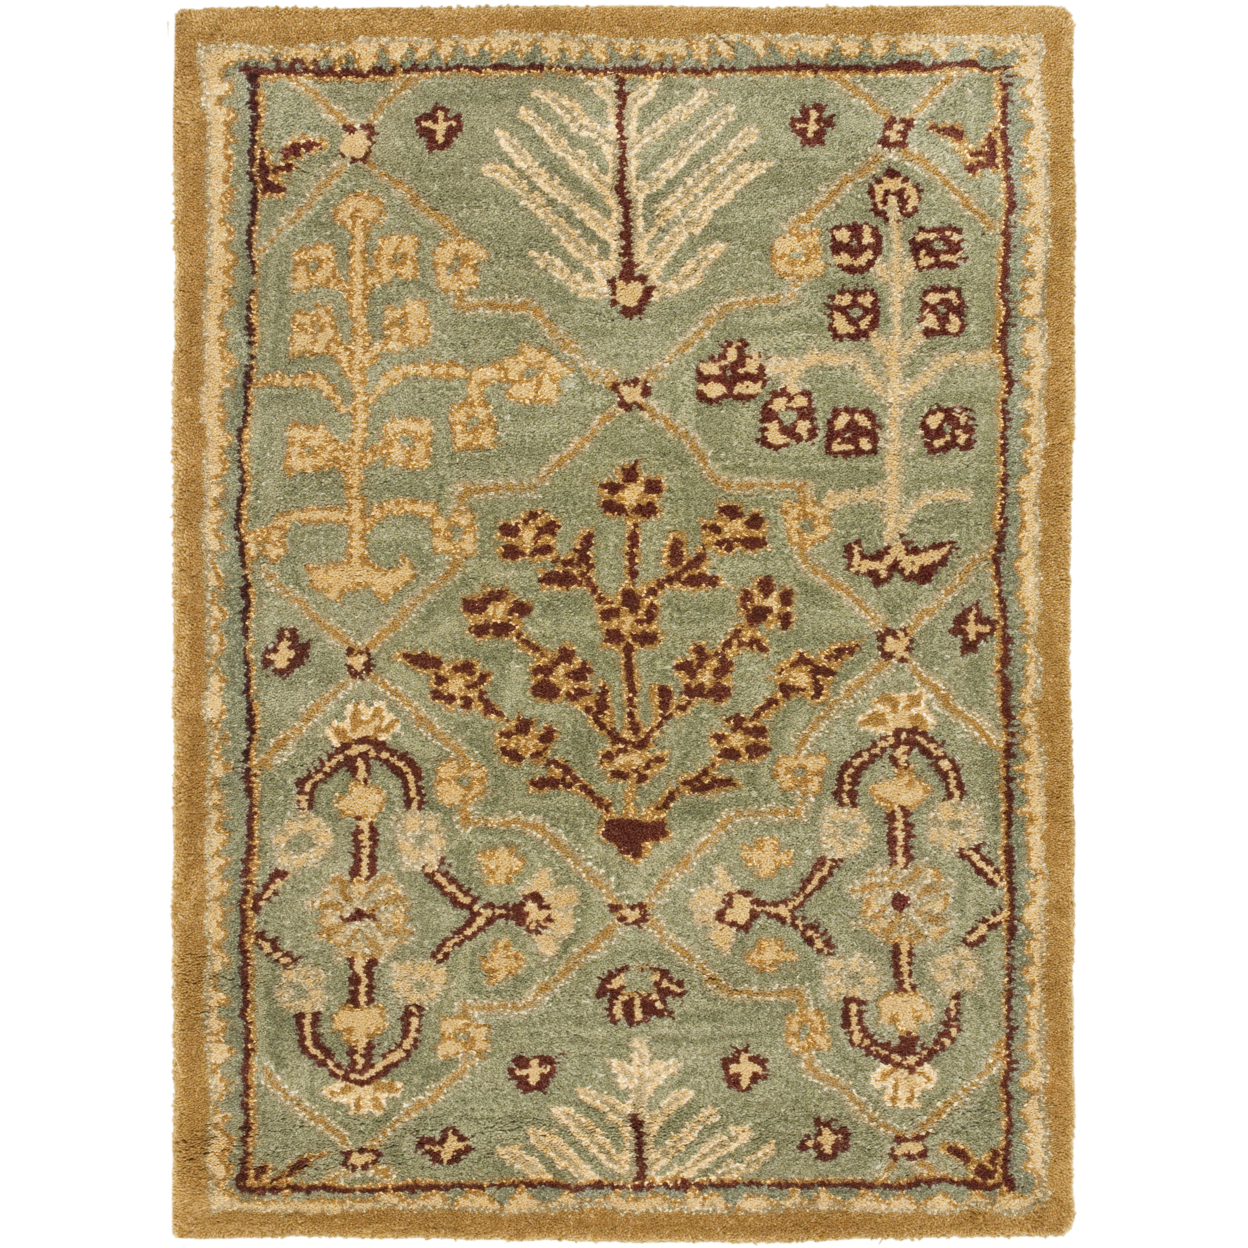 SAFAVIEH AT613A Antiquity Light Blue / Gold - 7' 6 X 9' 6 Oval